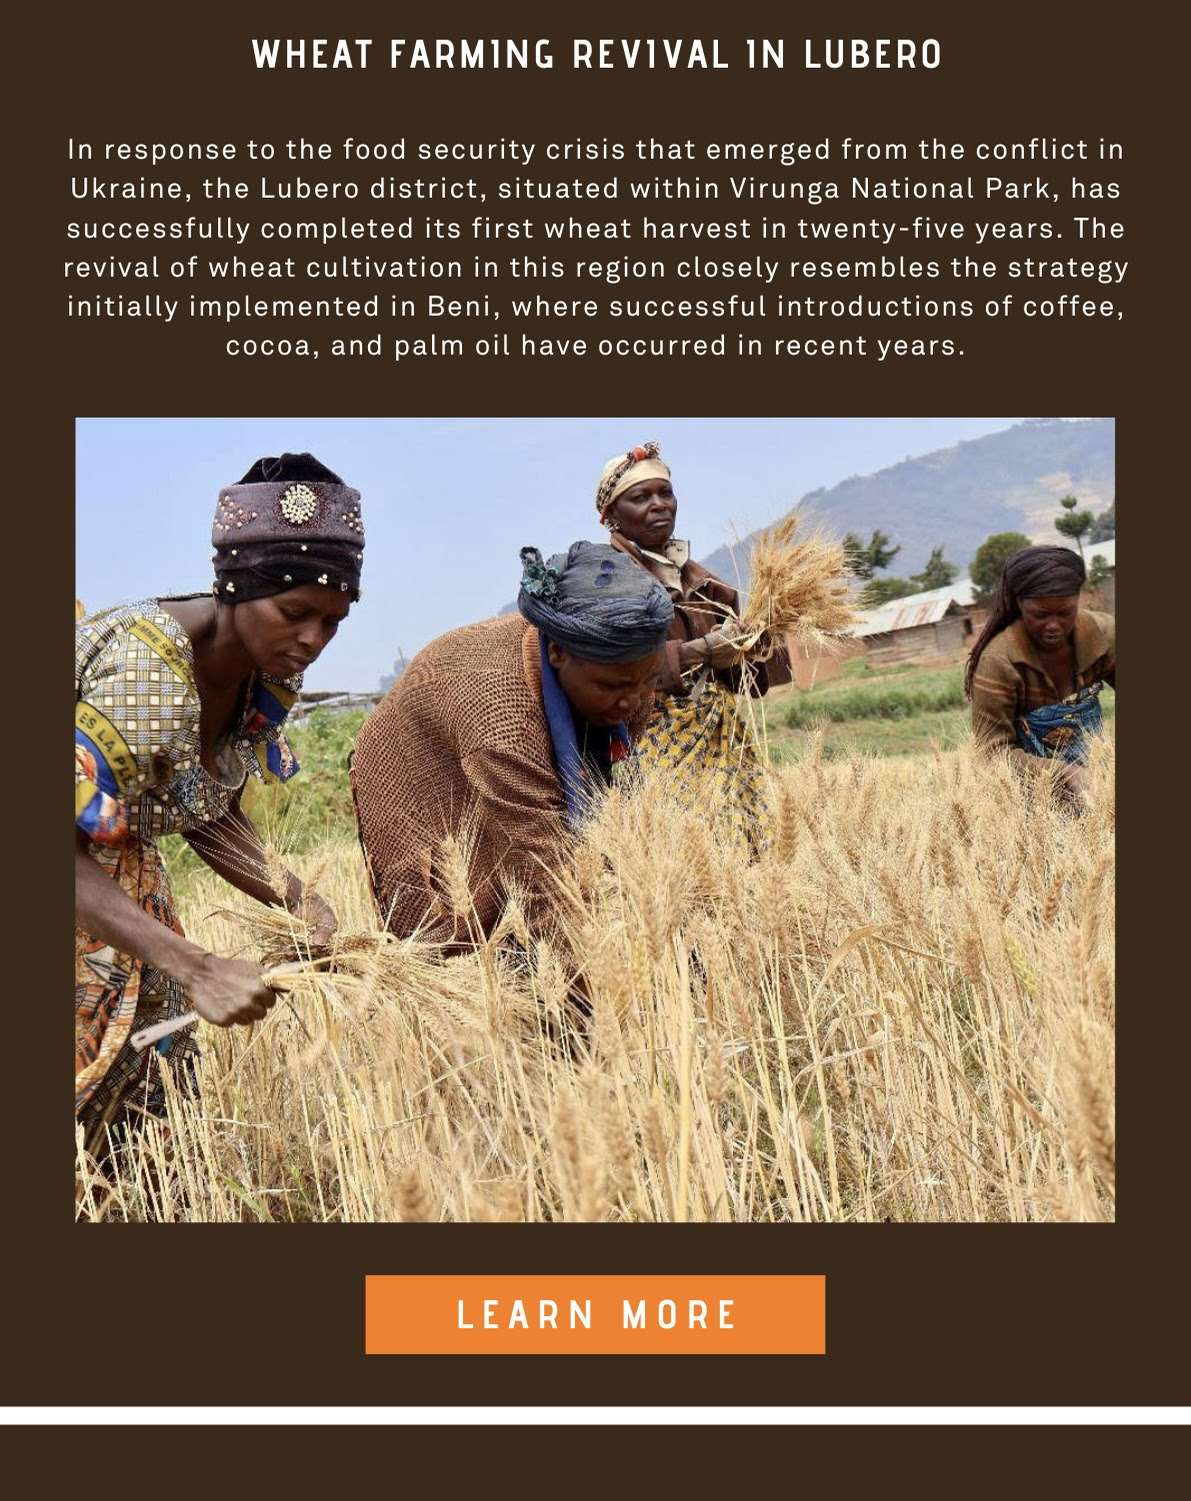 In response to the food security crisis that emerged from the conflict in Ukraine, the Lubero district, situated within Virunga National Park, has successfully completed its first wheat harvest in twenty-five years.